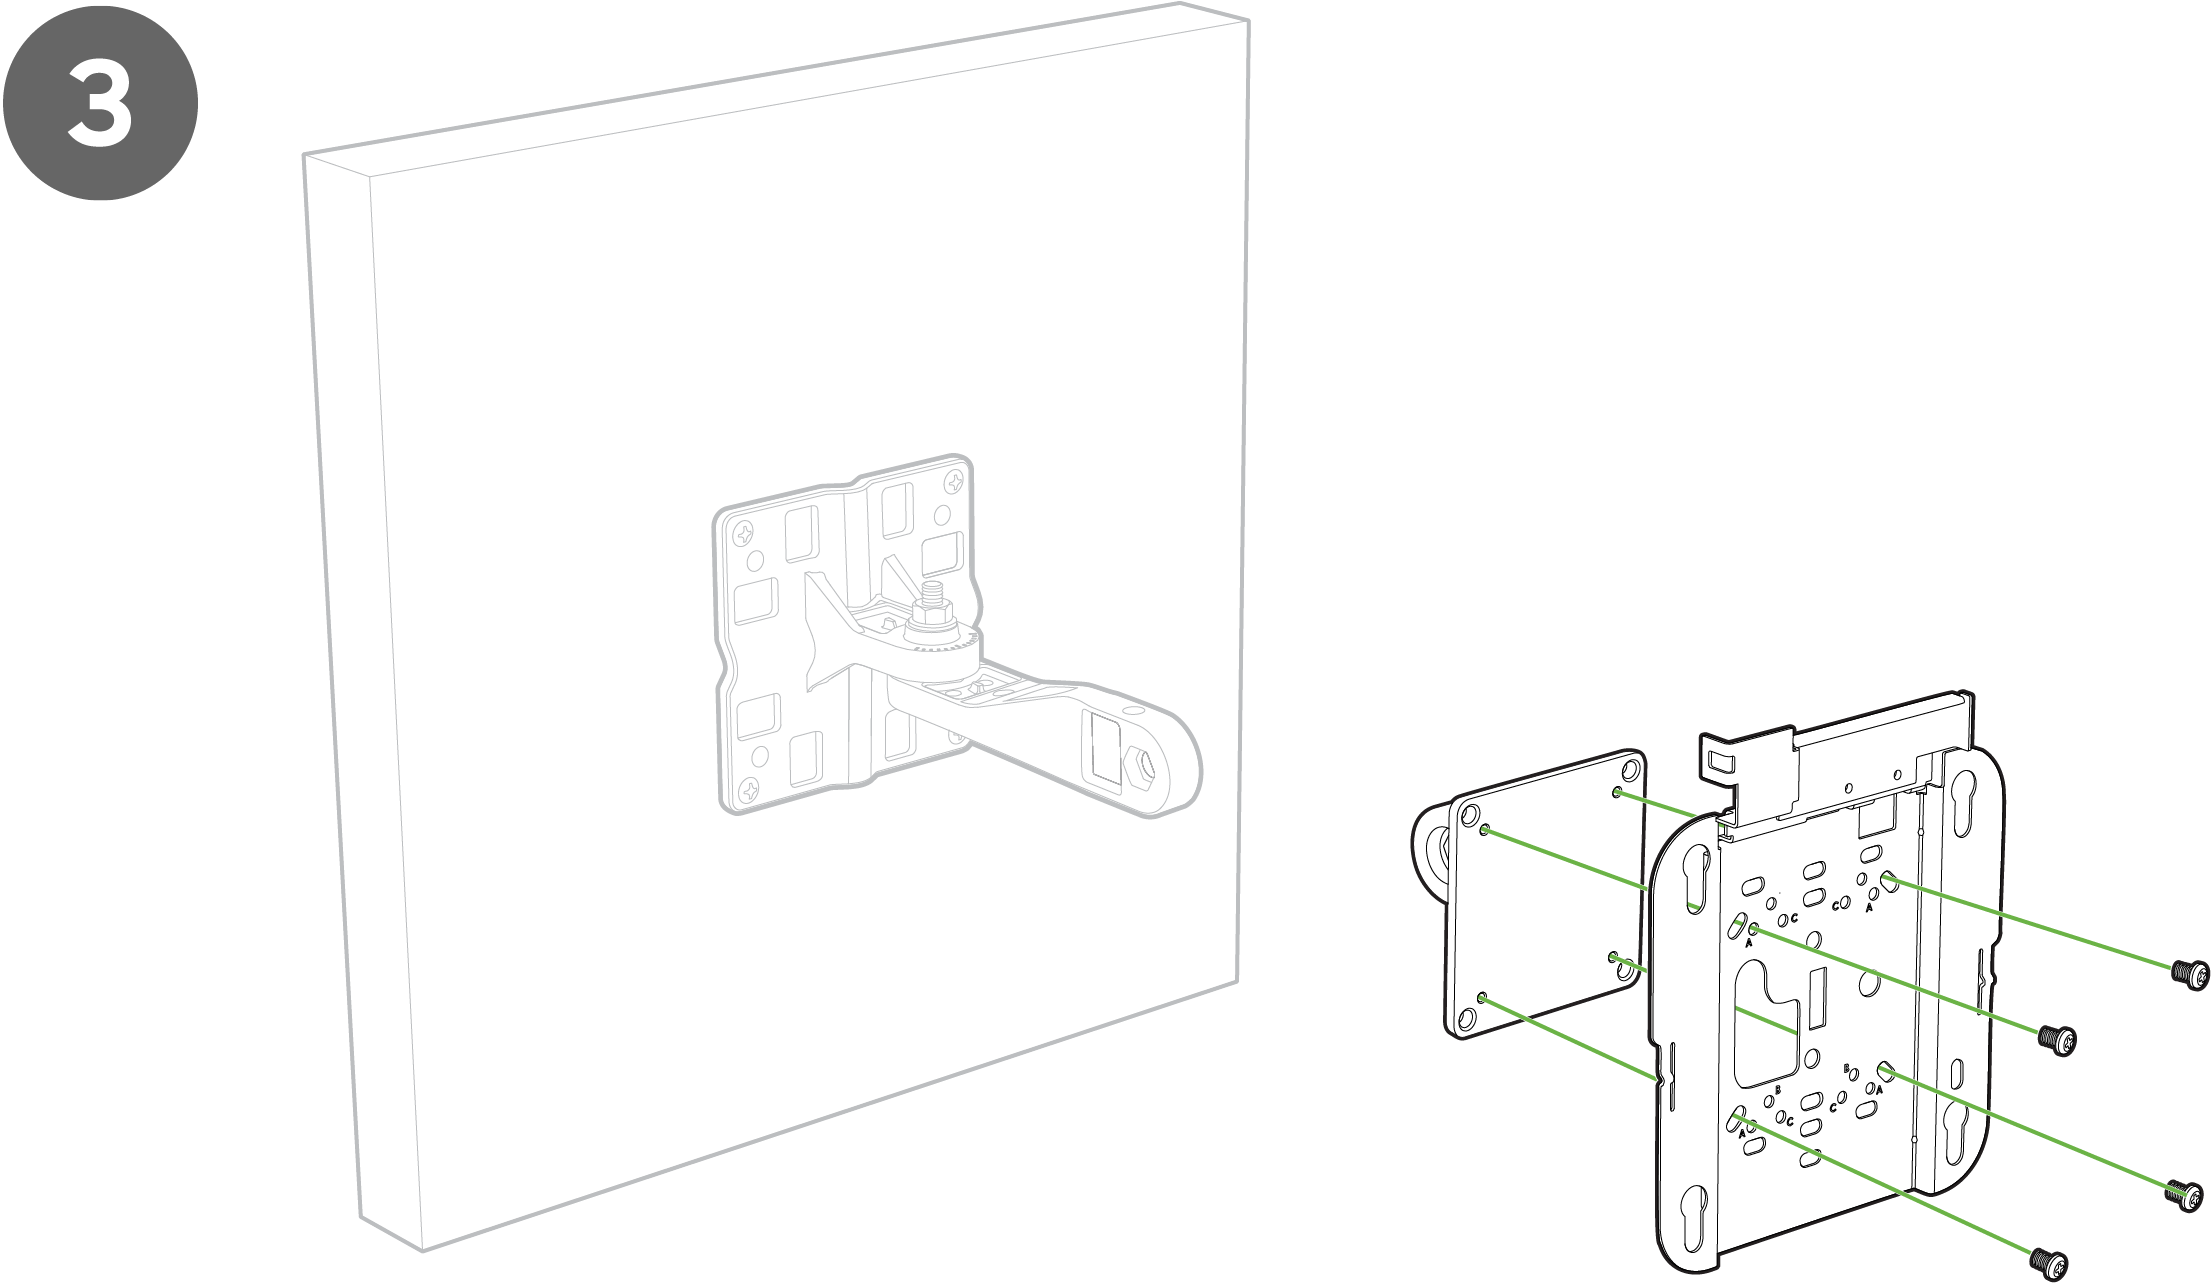 Image showing attachment of AIR-AP-BRACKET-2 to the access point bracket plate by using four M4 screws through the holes in the bracket